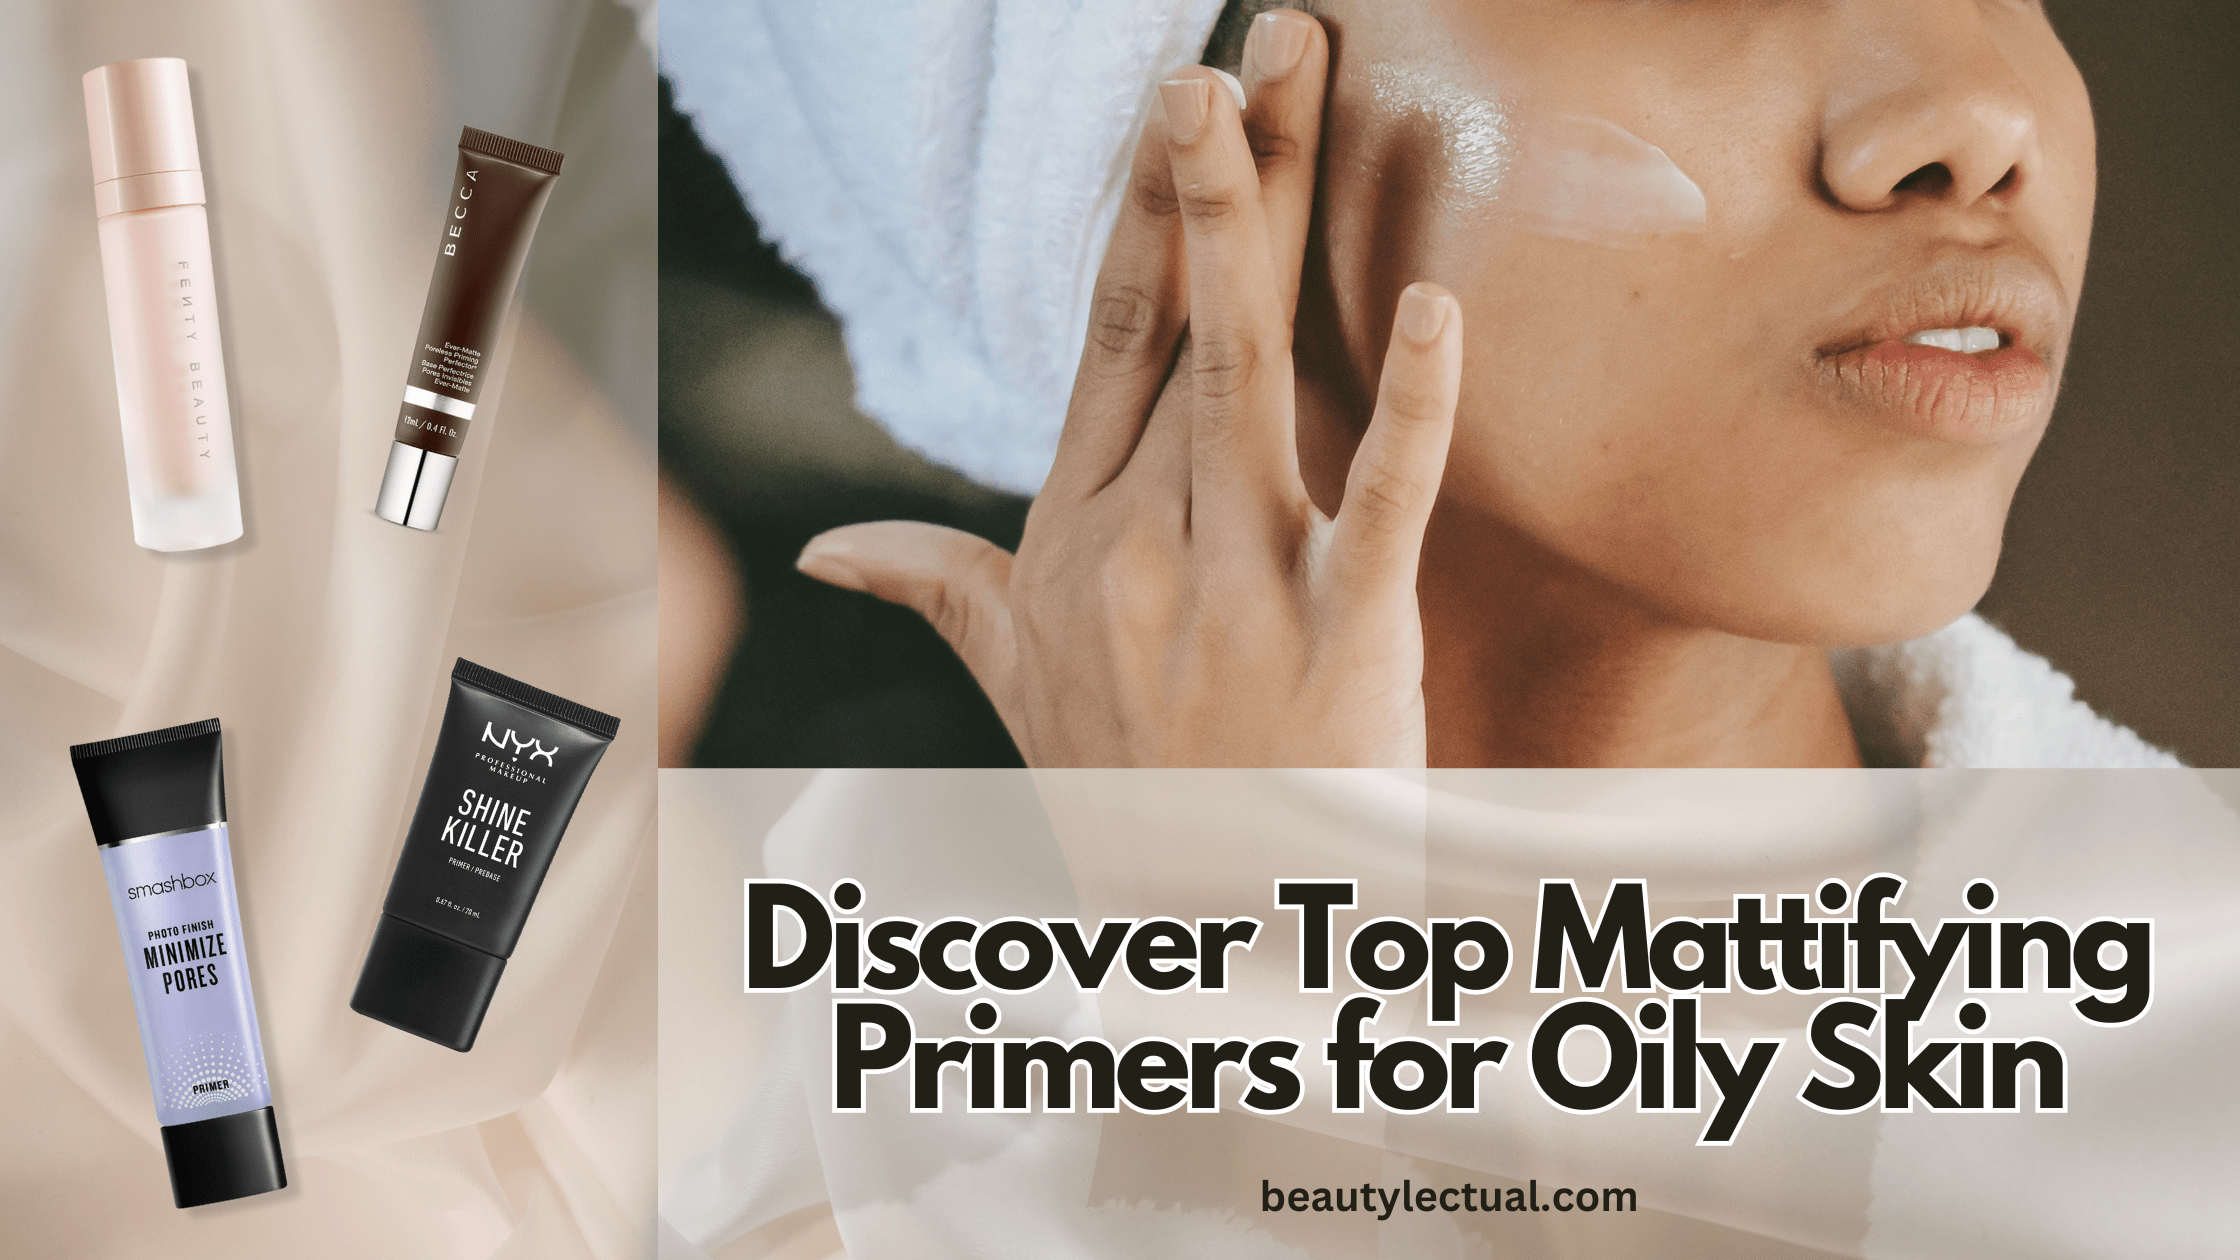 Mattifying Primers for Oily Skin